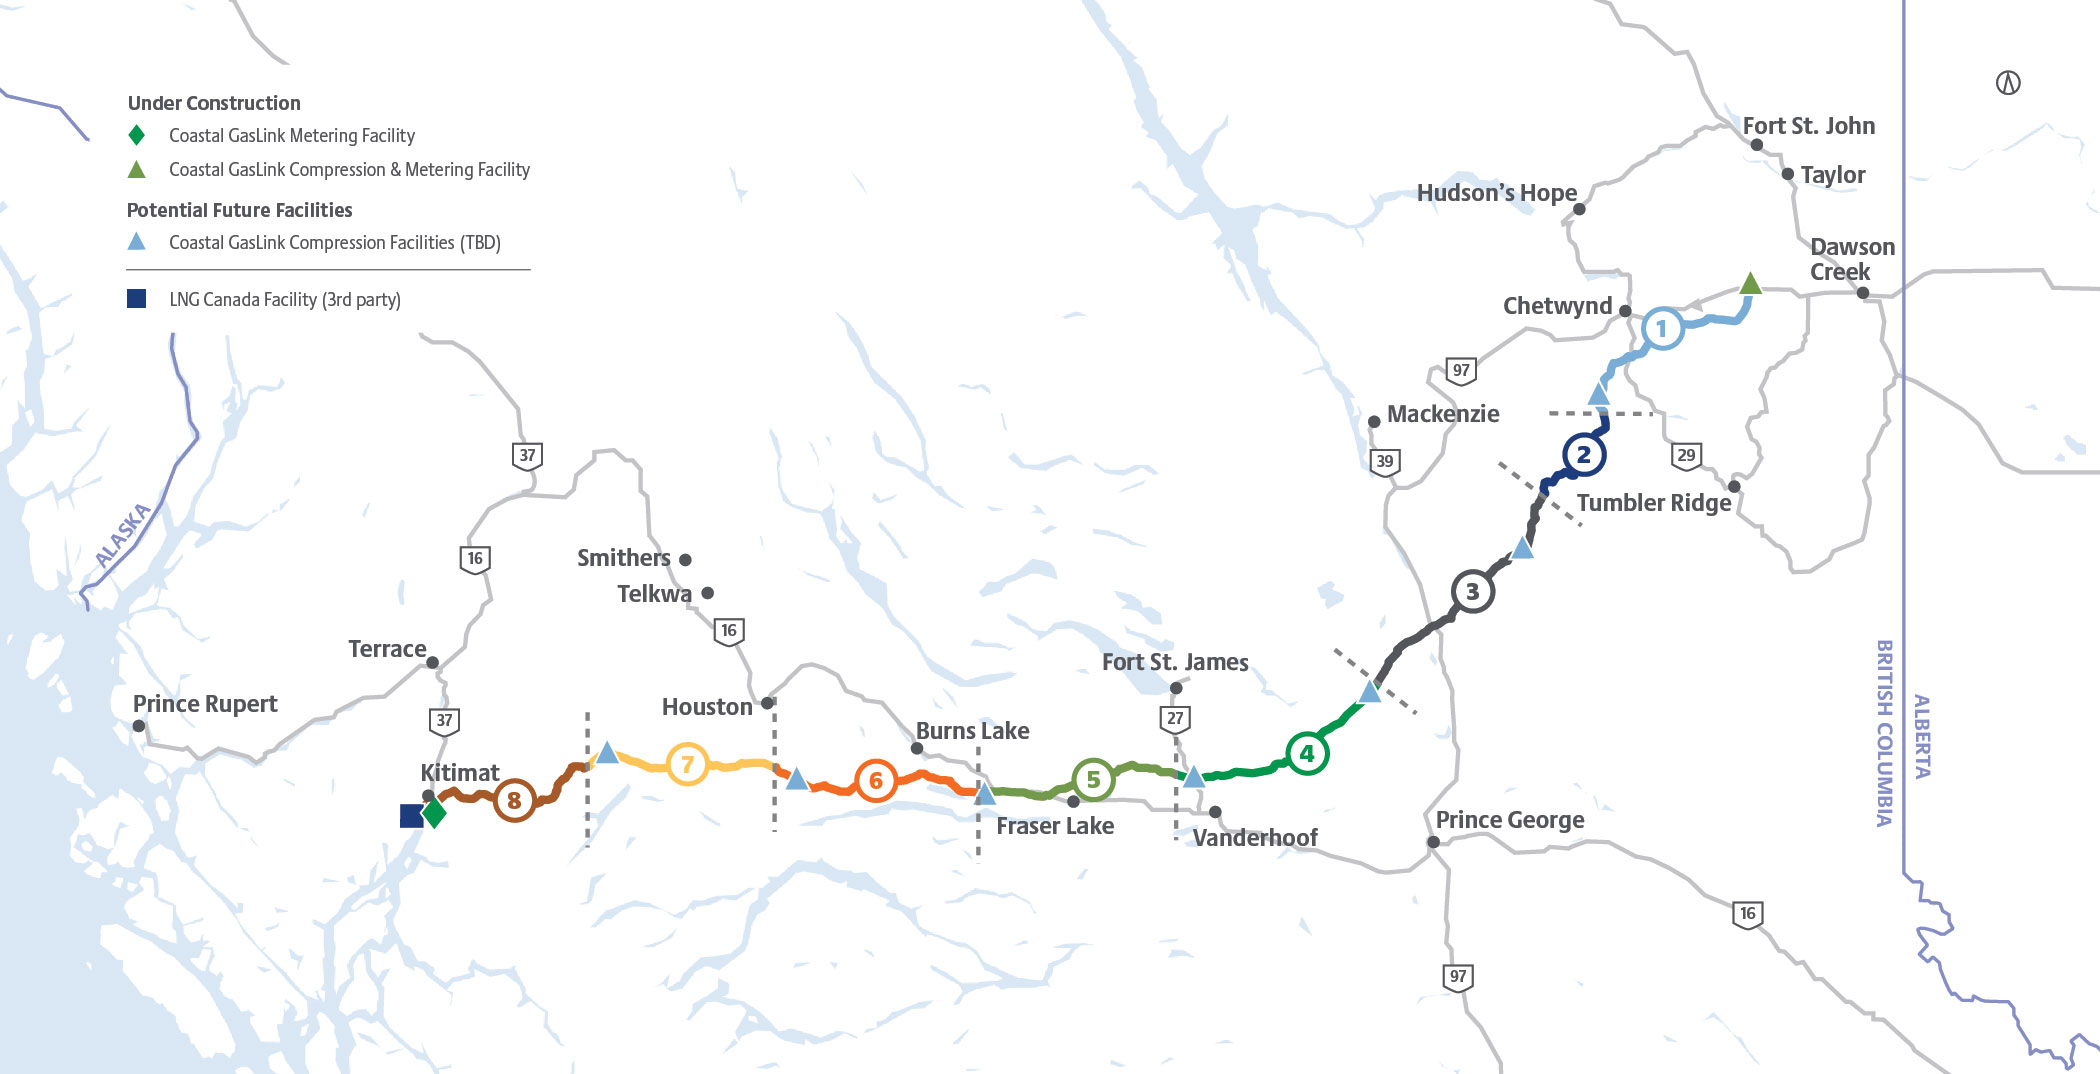 A map shows the route of the Coastal GasLink Pipeline, one of many projects the British Columbia Business Council says should be supported as part of plans to improve the province’s economy.